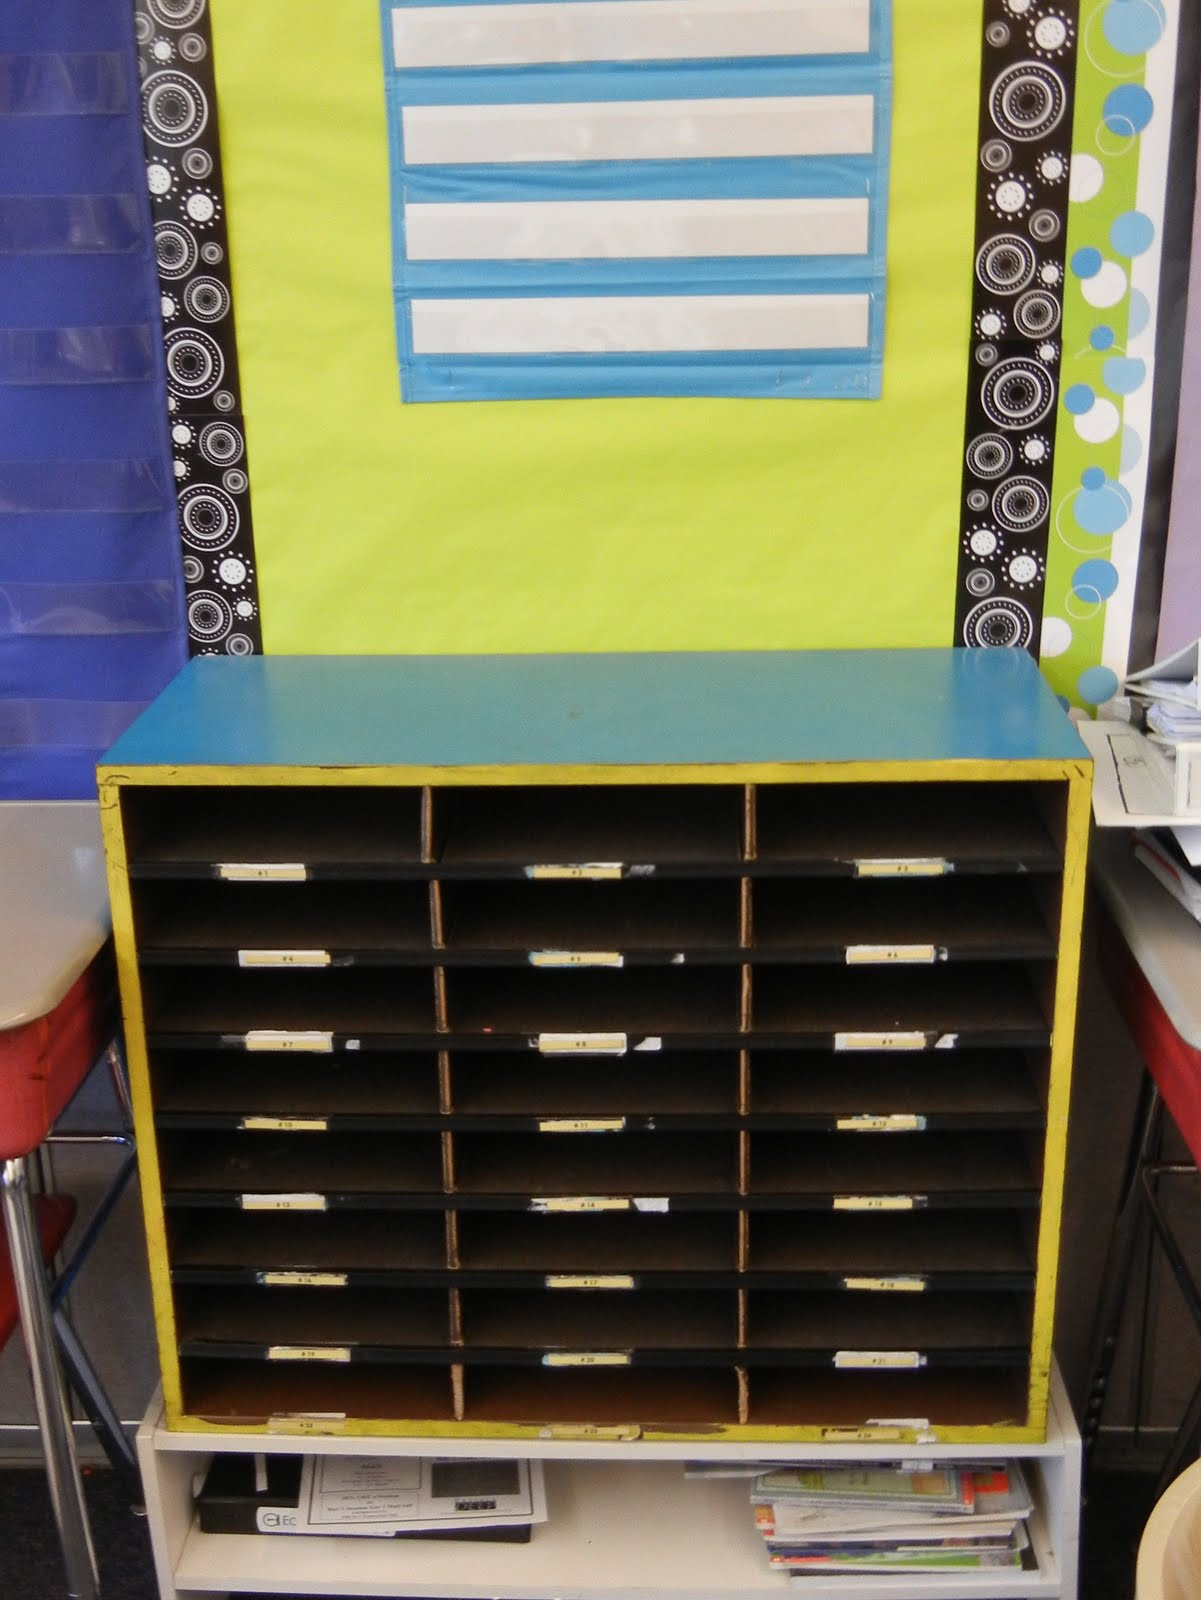 Classroom Mailboxes DIY
 Ideas for Cheap and Easy STUDENT MAILBOXES in the